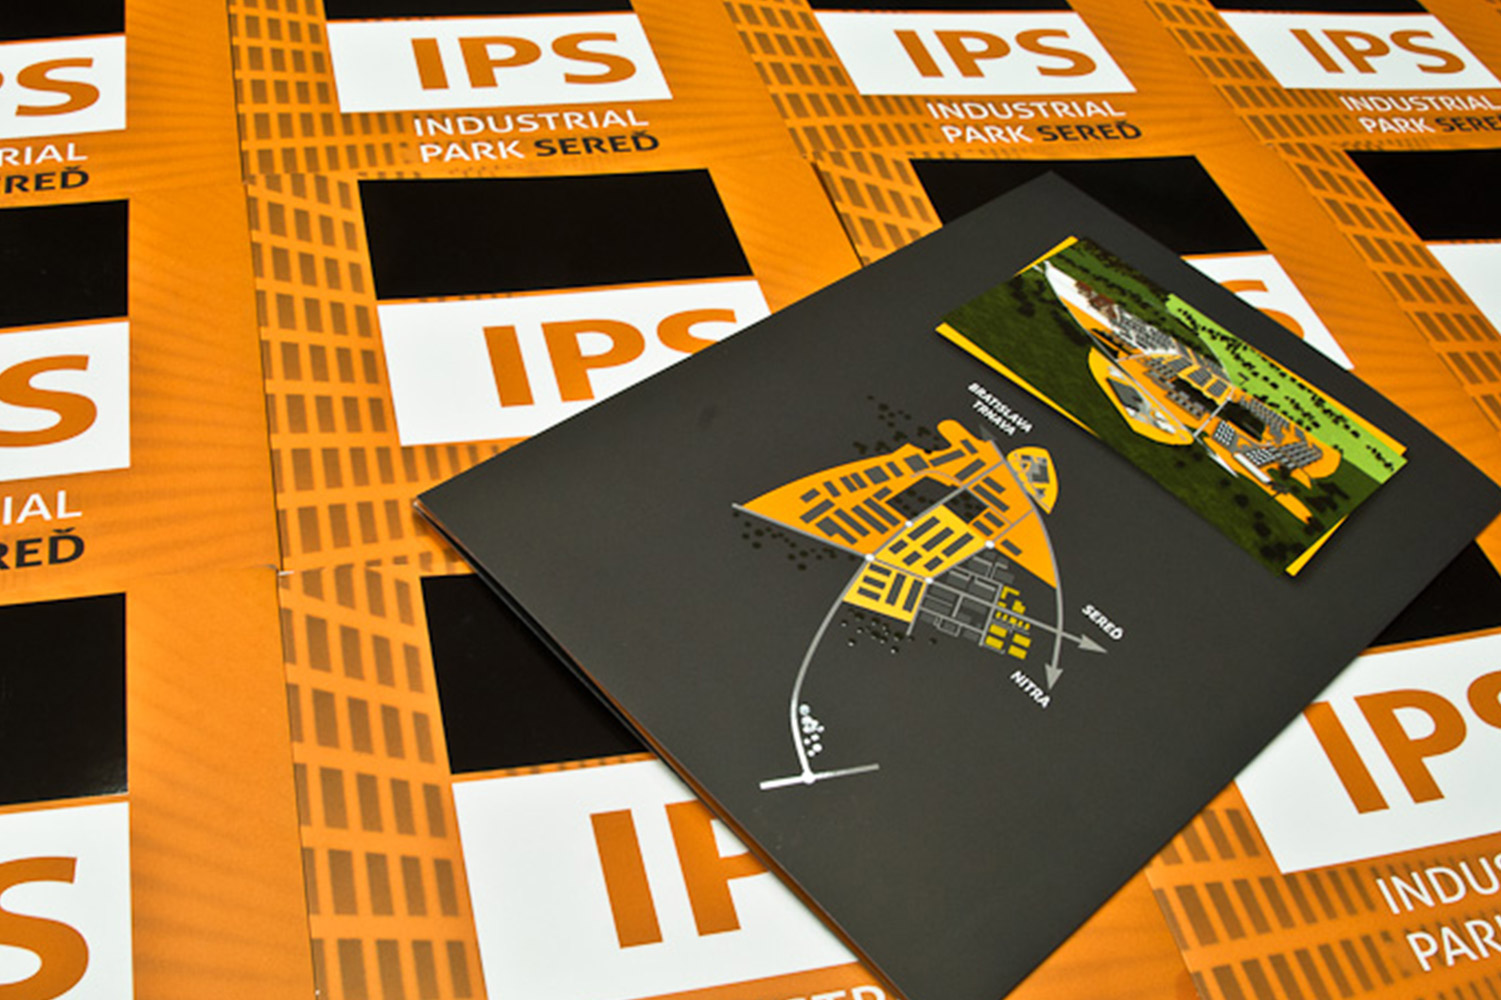 iPark Sred, corporate identity image